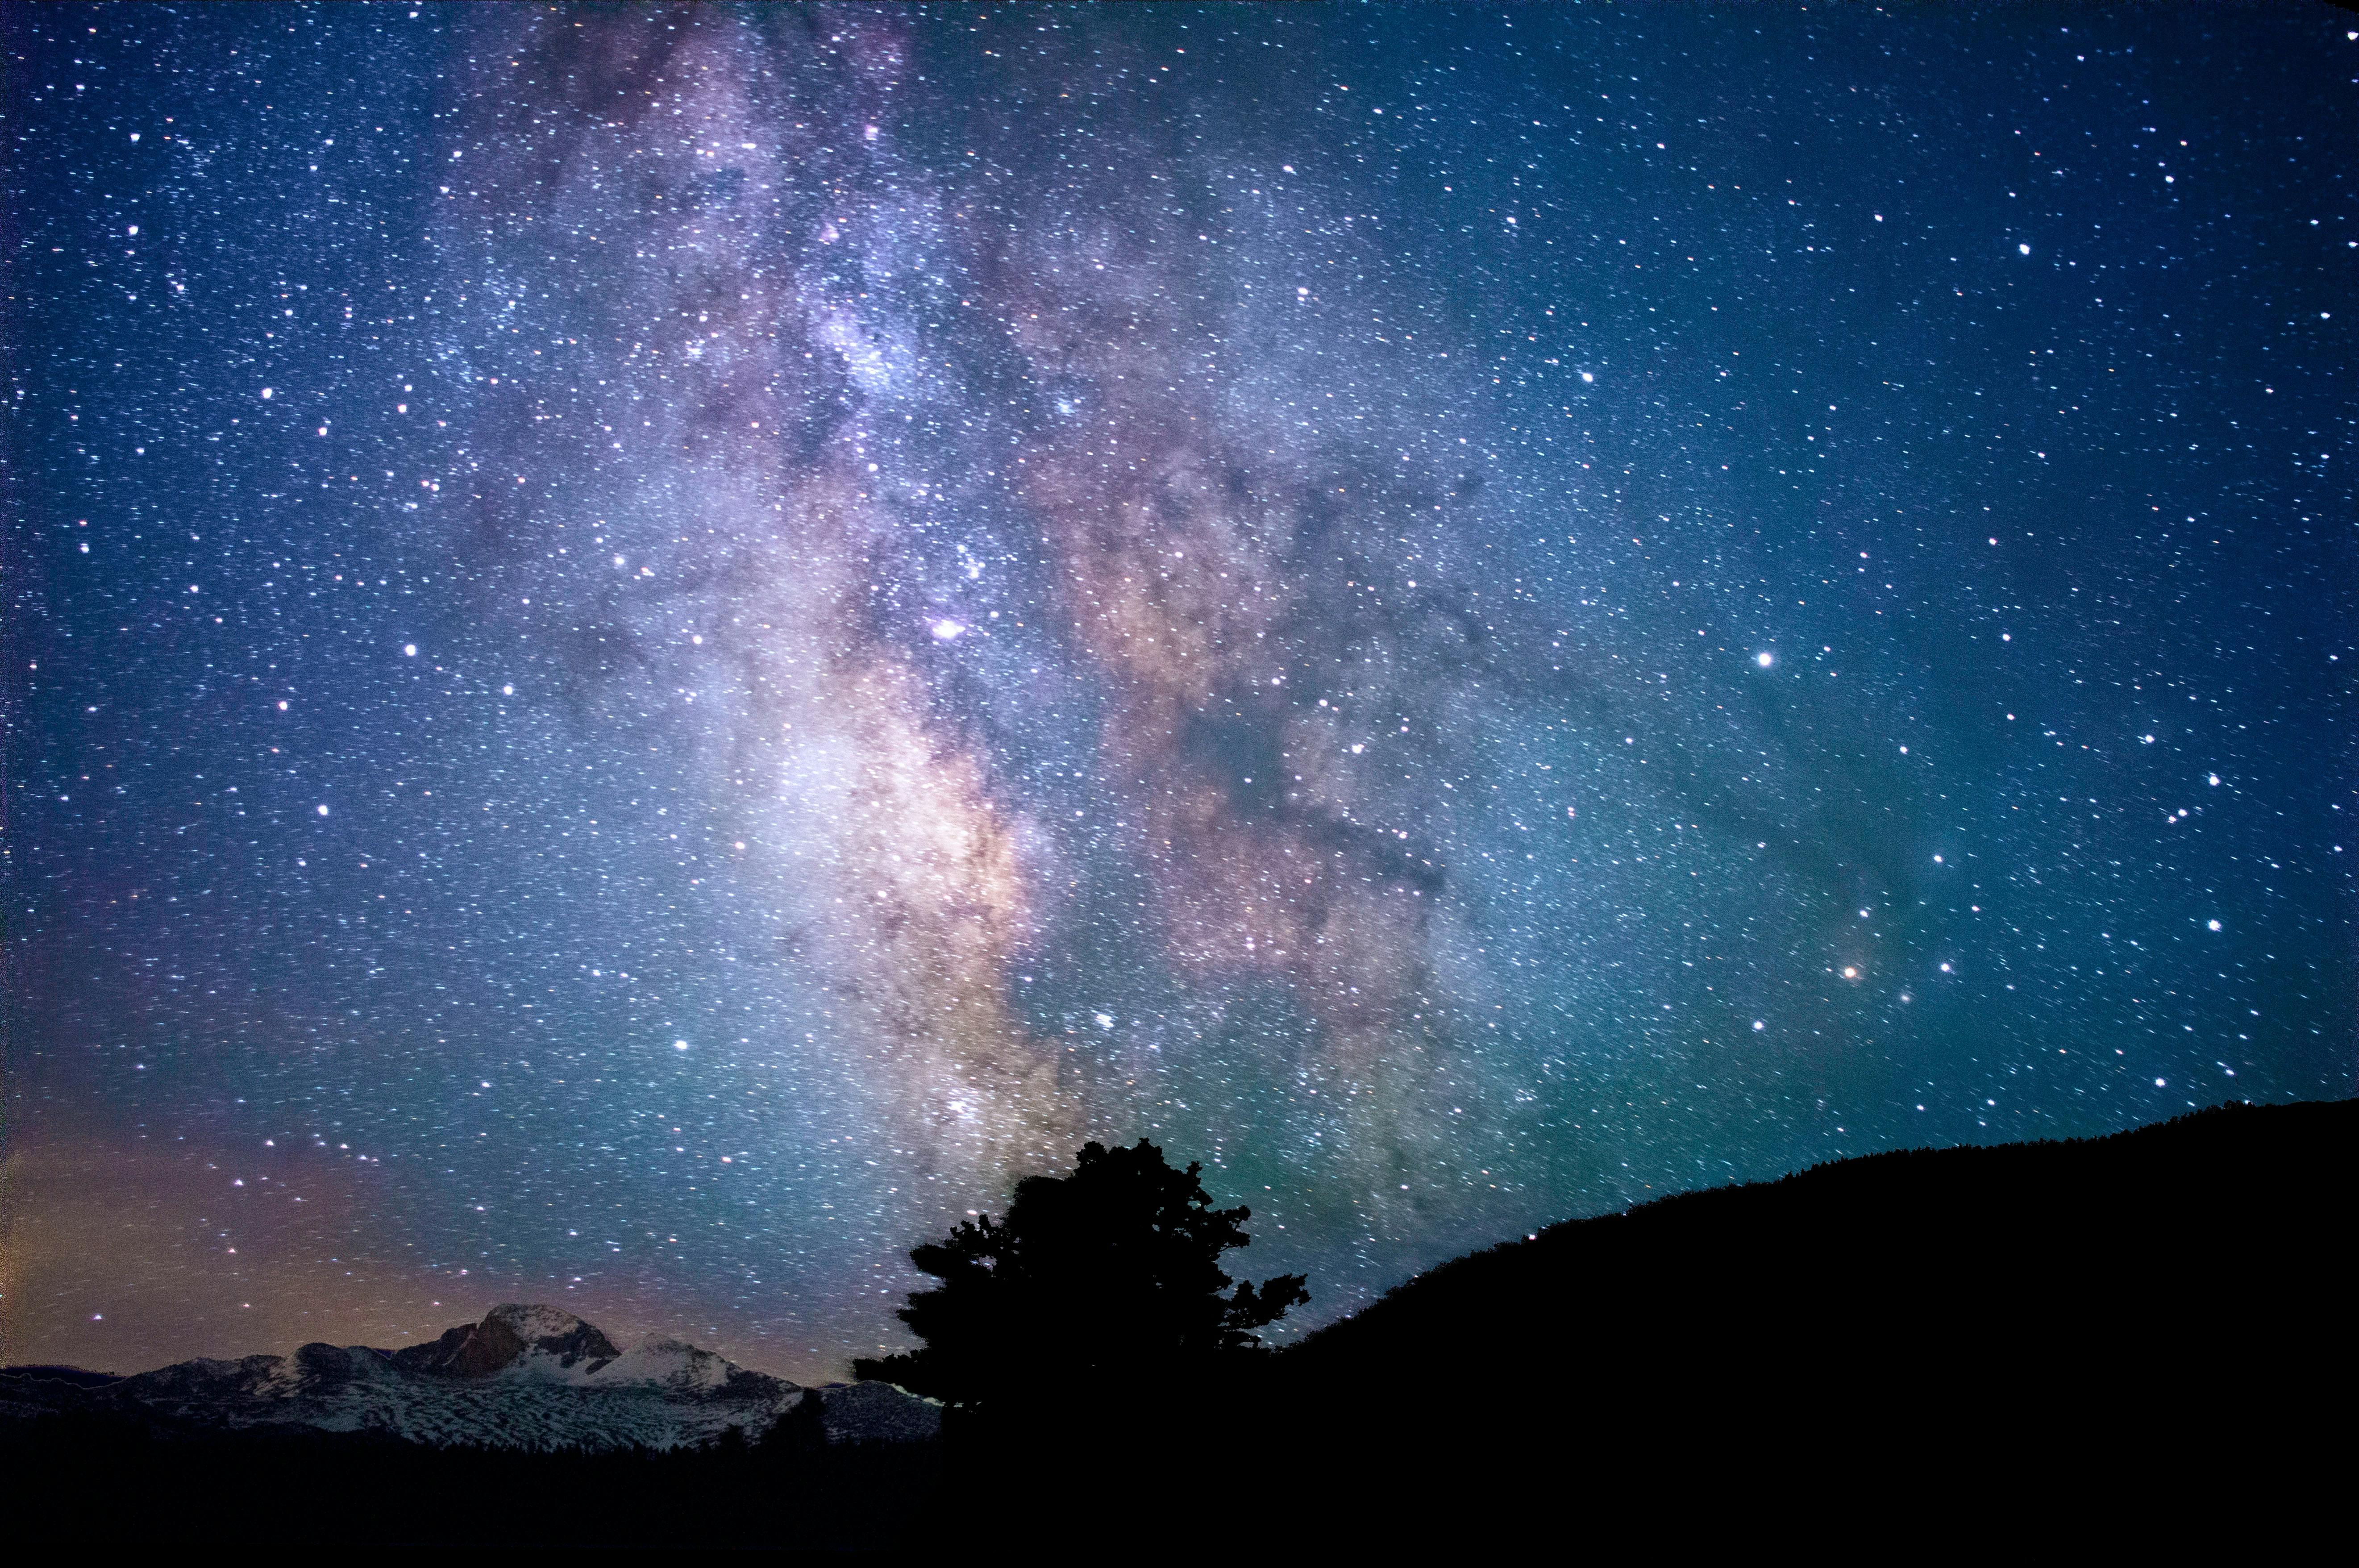 The Milky Way is visible above a dark landscape with a snow-capped mountain rising in the distance. 